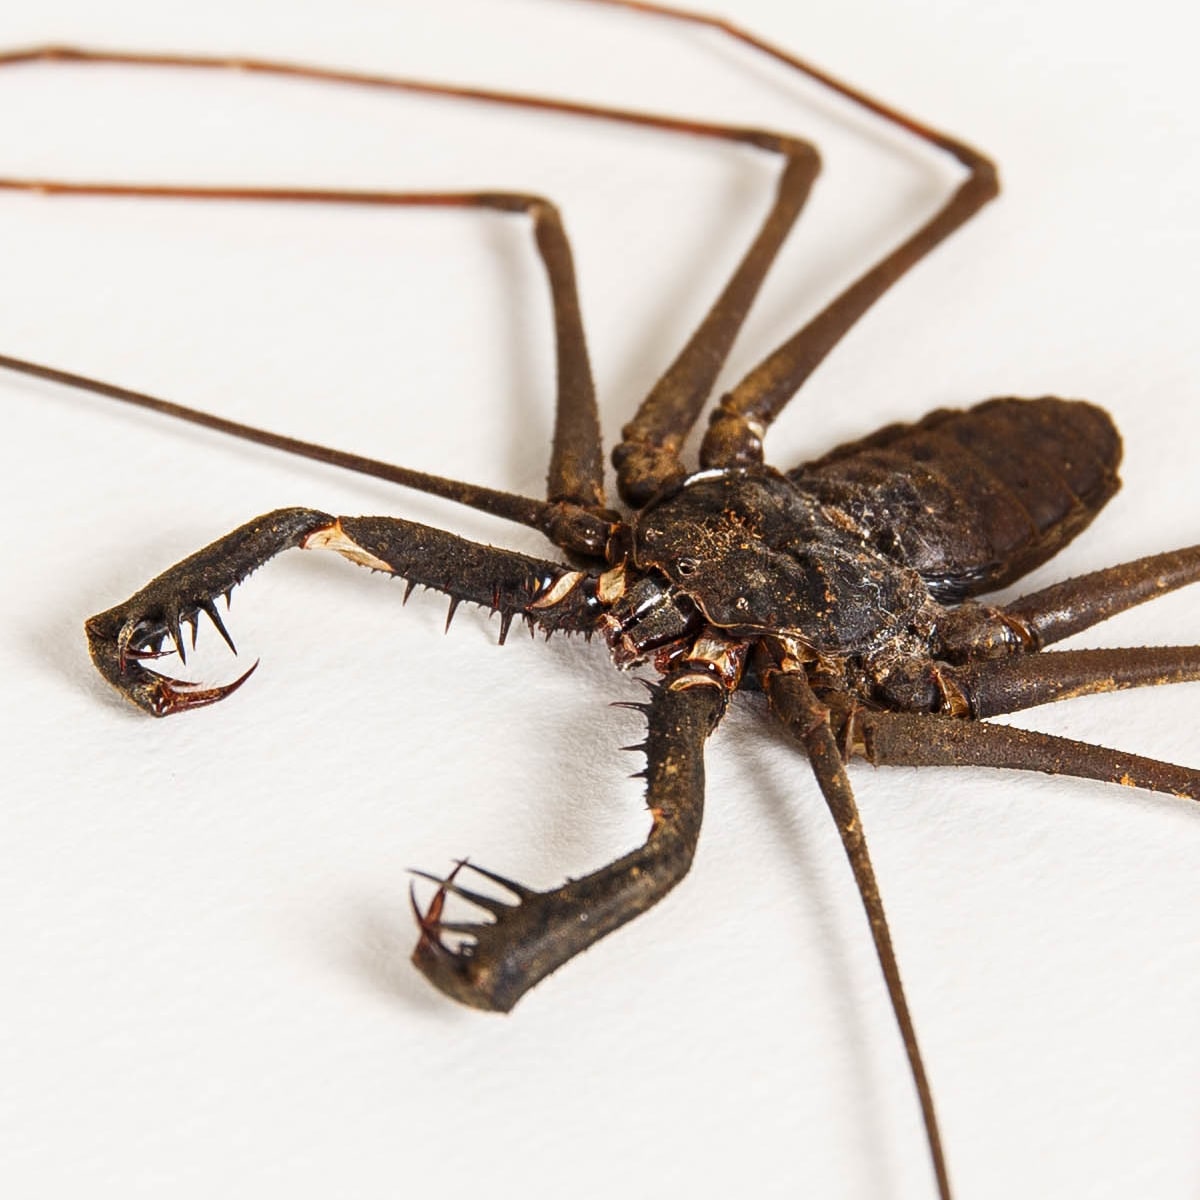 Tailless Whip Scorpion In Box Frame (Amblypygi sp)